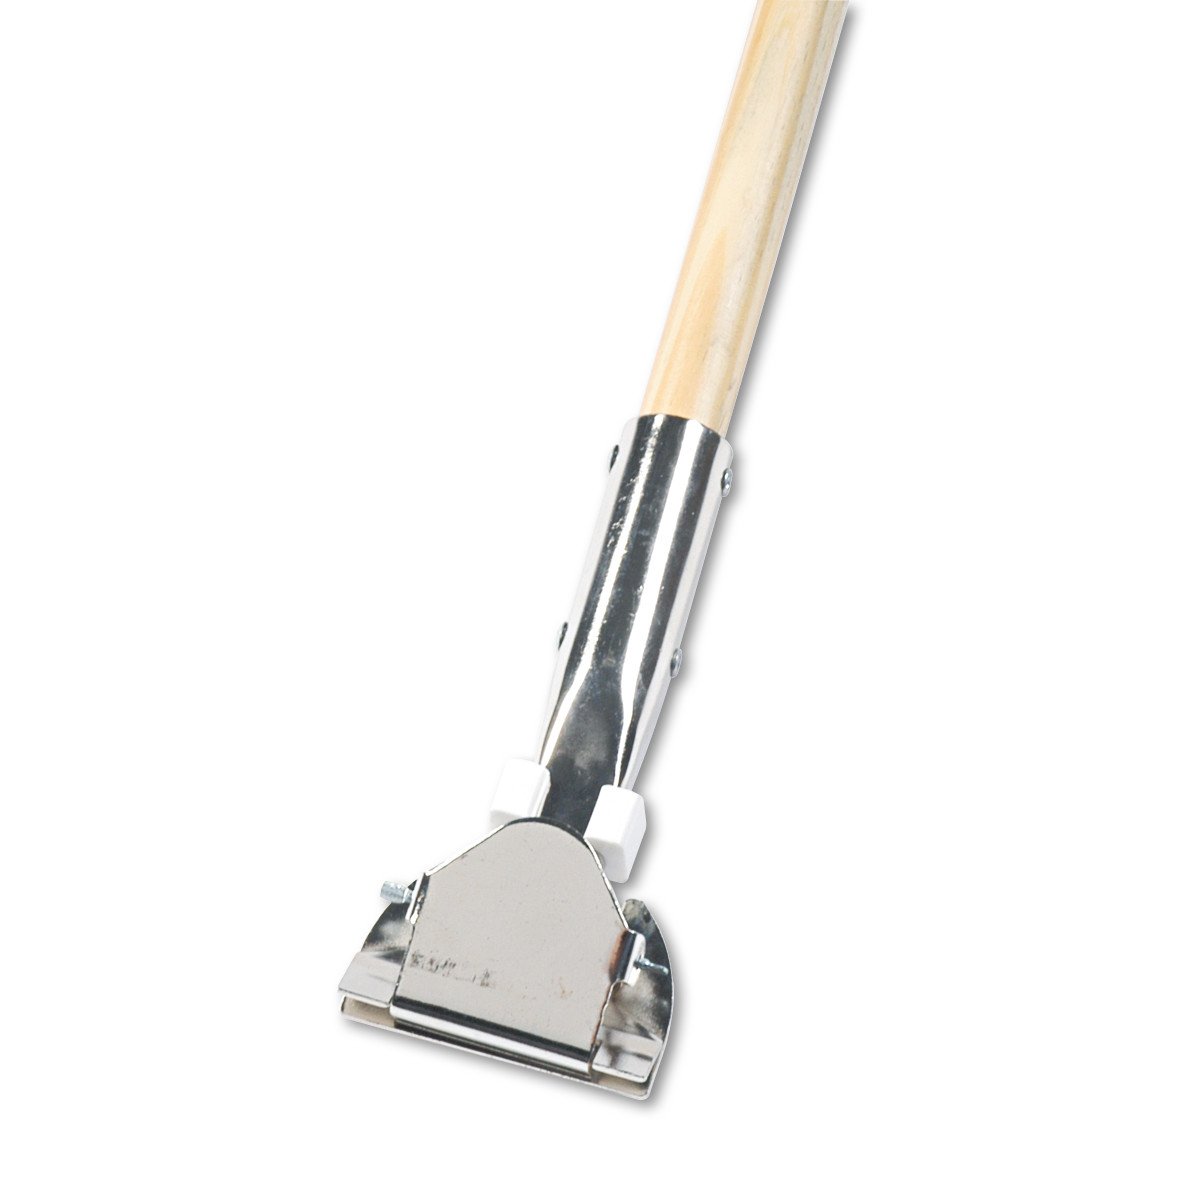 Clip-On Dust Mop Handle - Lacquered Wood, Swivel Head, 1